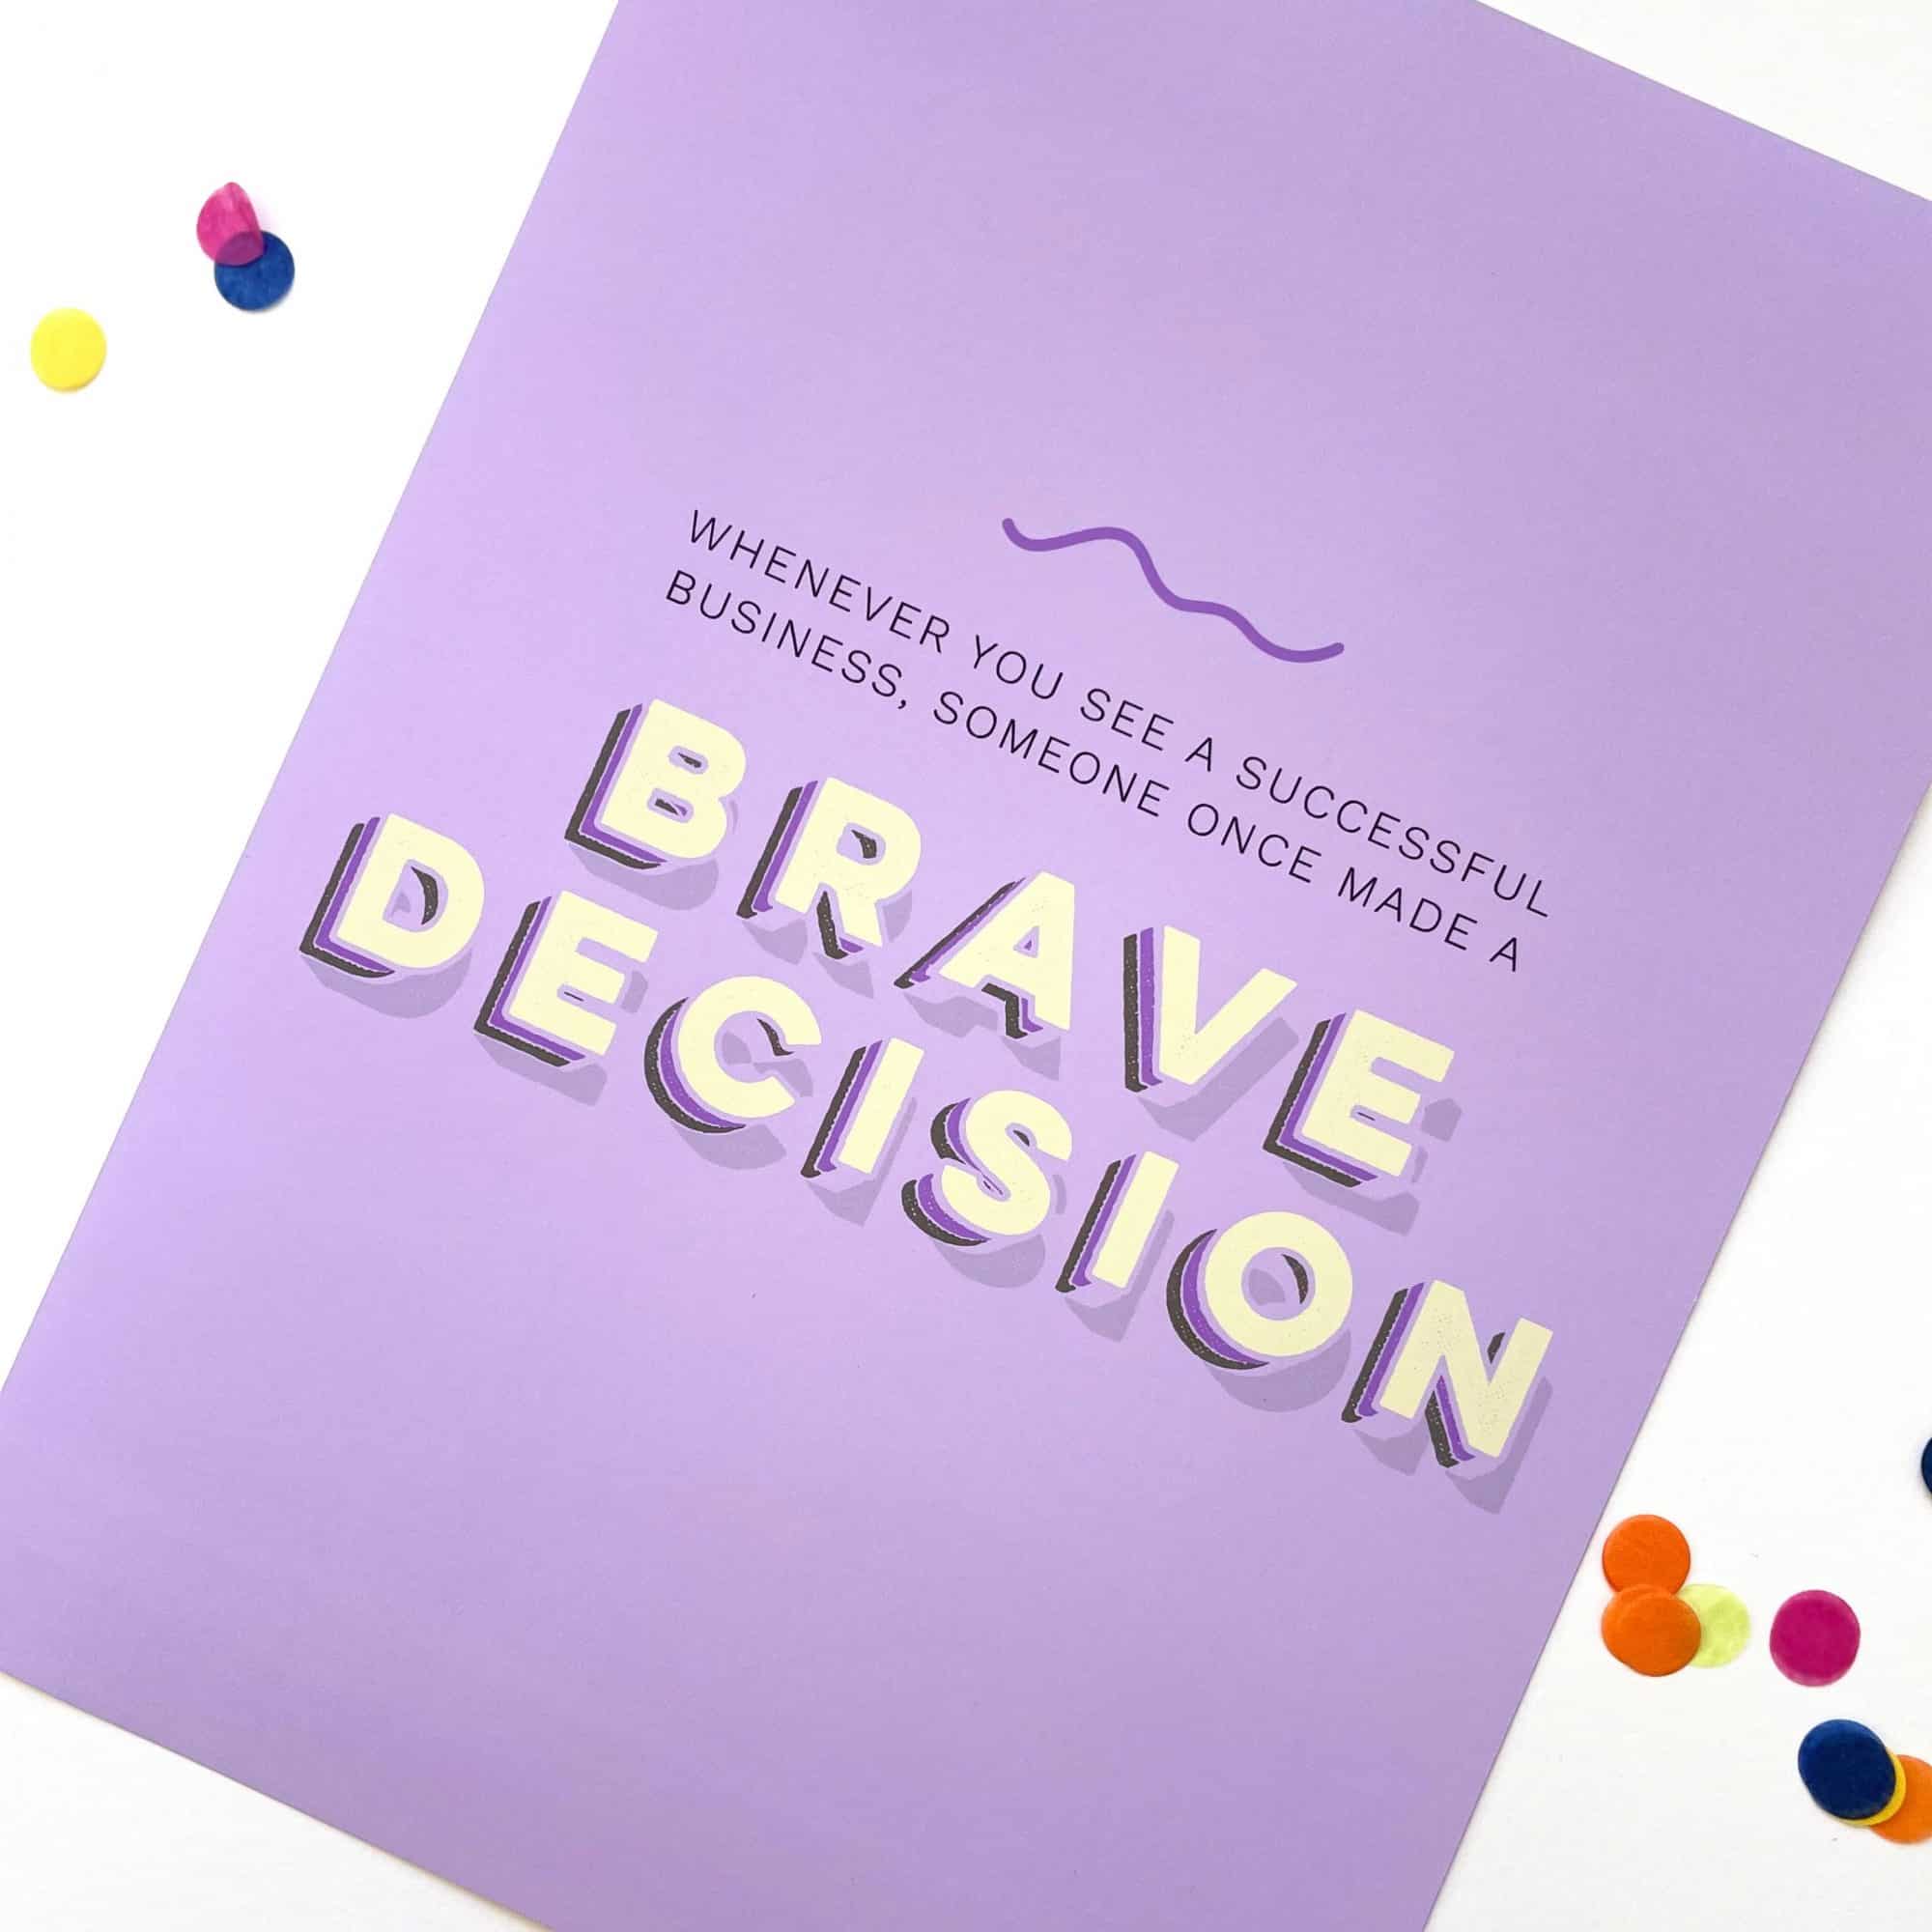 Whenever you see a successful business, someone once made a brave decision